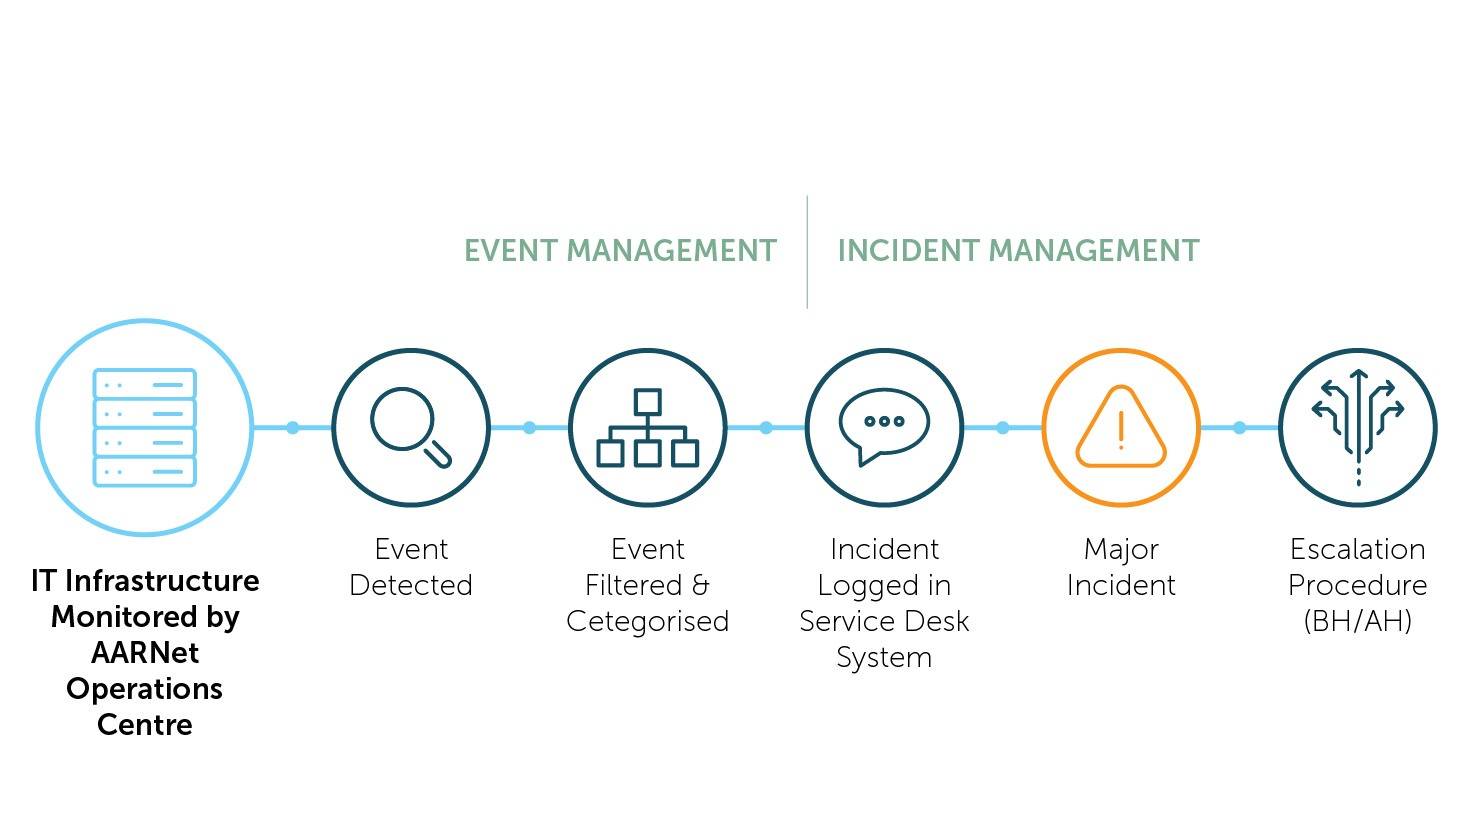 How the AARNet Operations Centre manages events